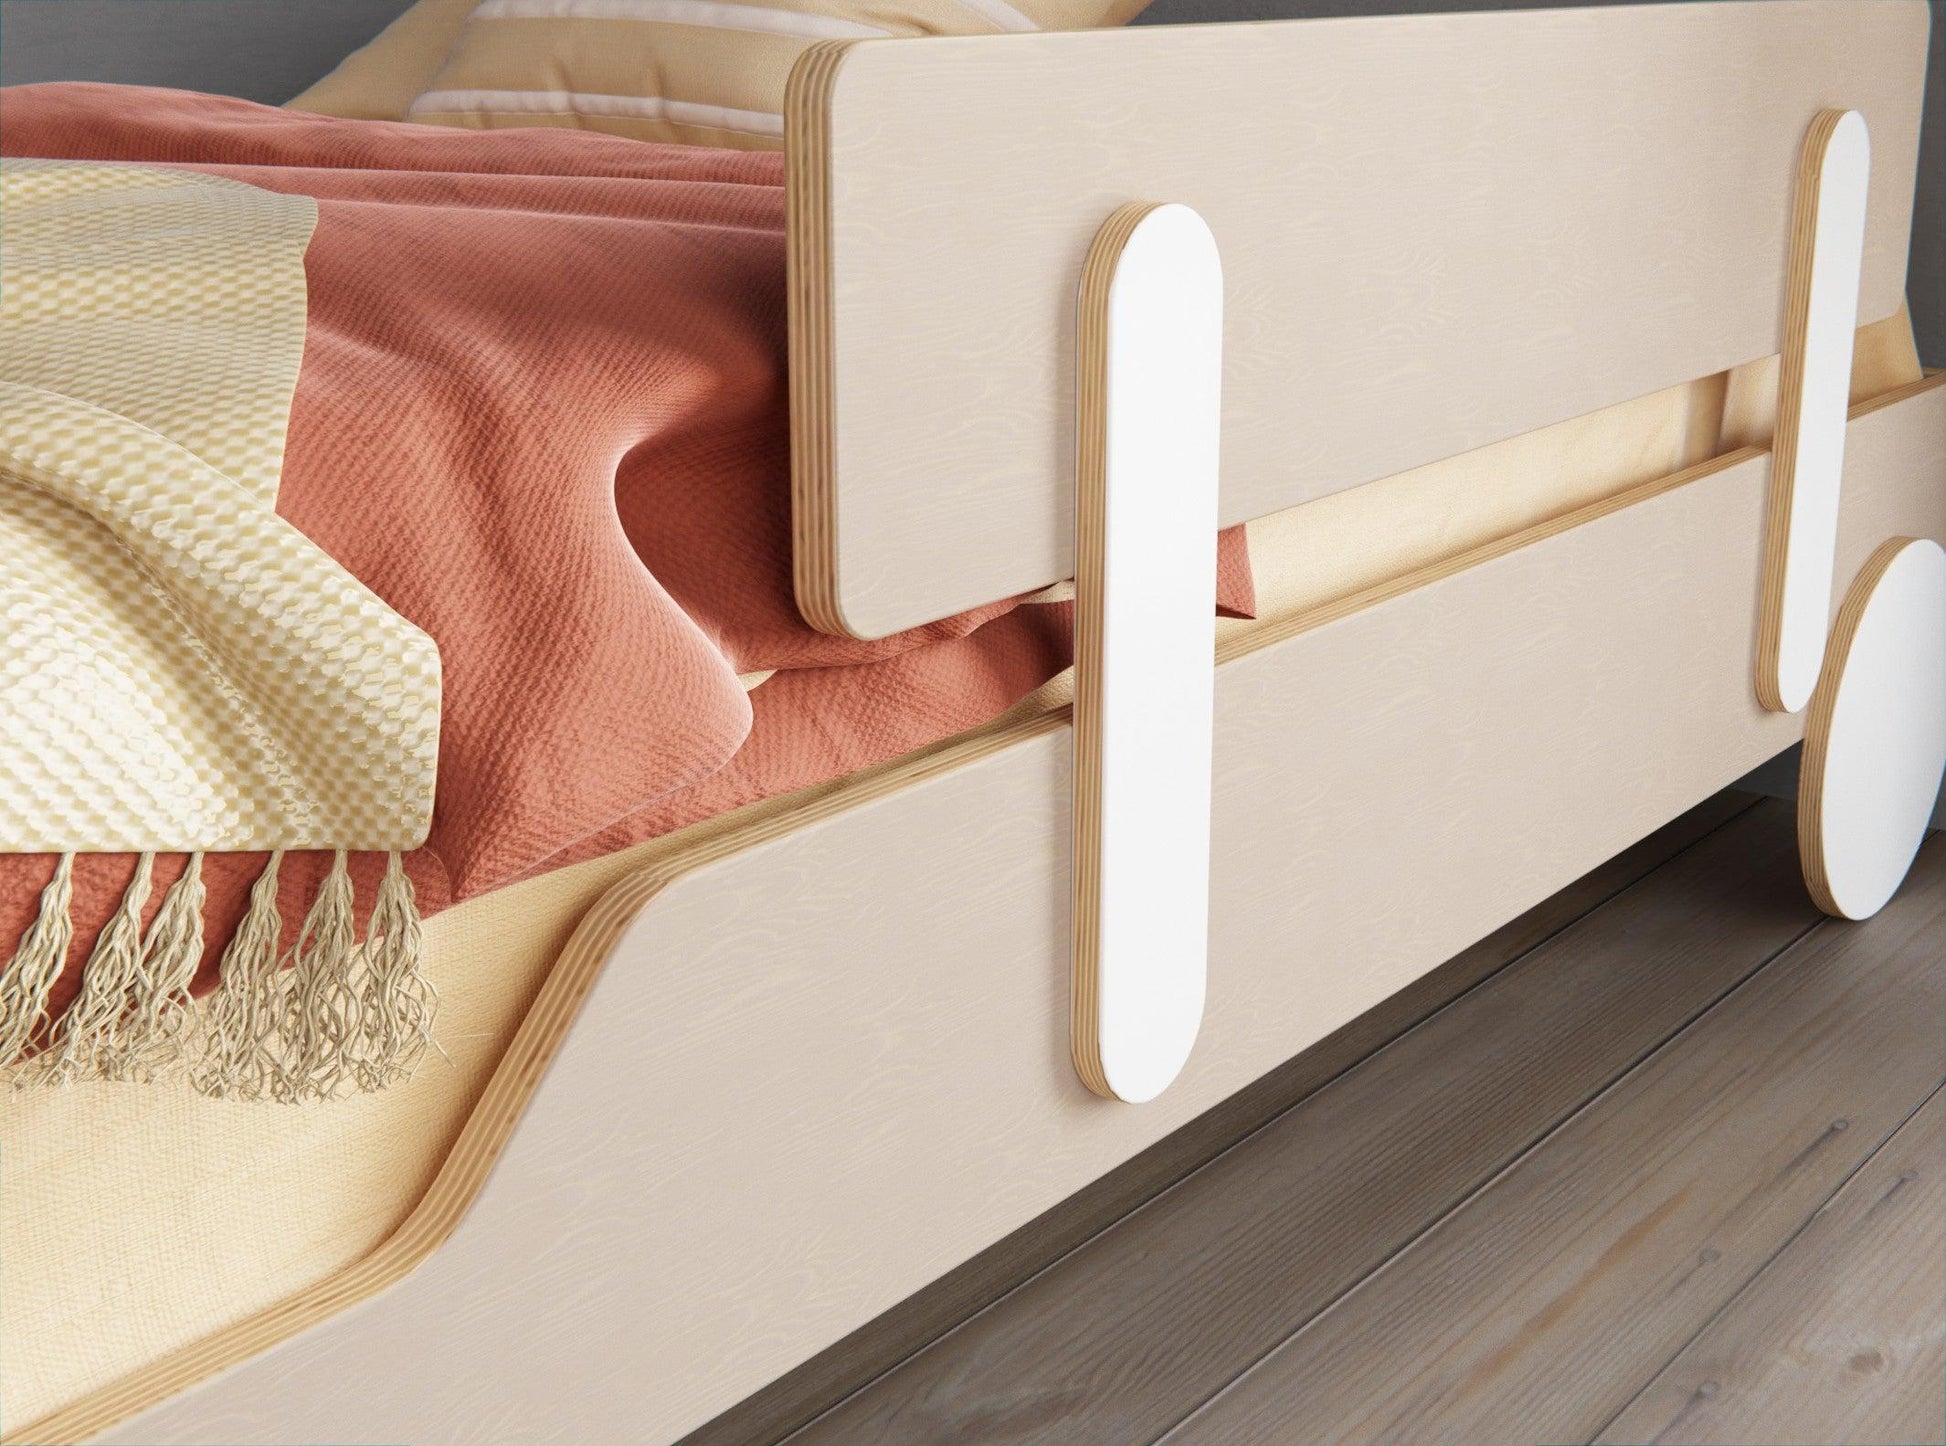 Safeguard your toddler's bed with our protective guardrails and stylish headboards. Create a secure and charming sleeping environment with these essential accessories.